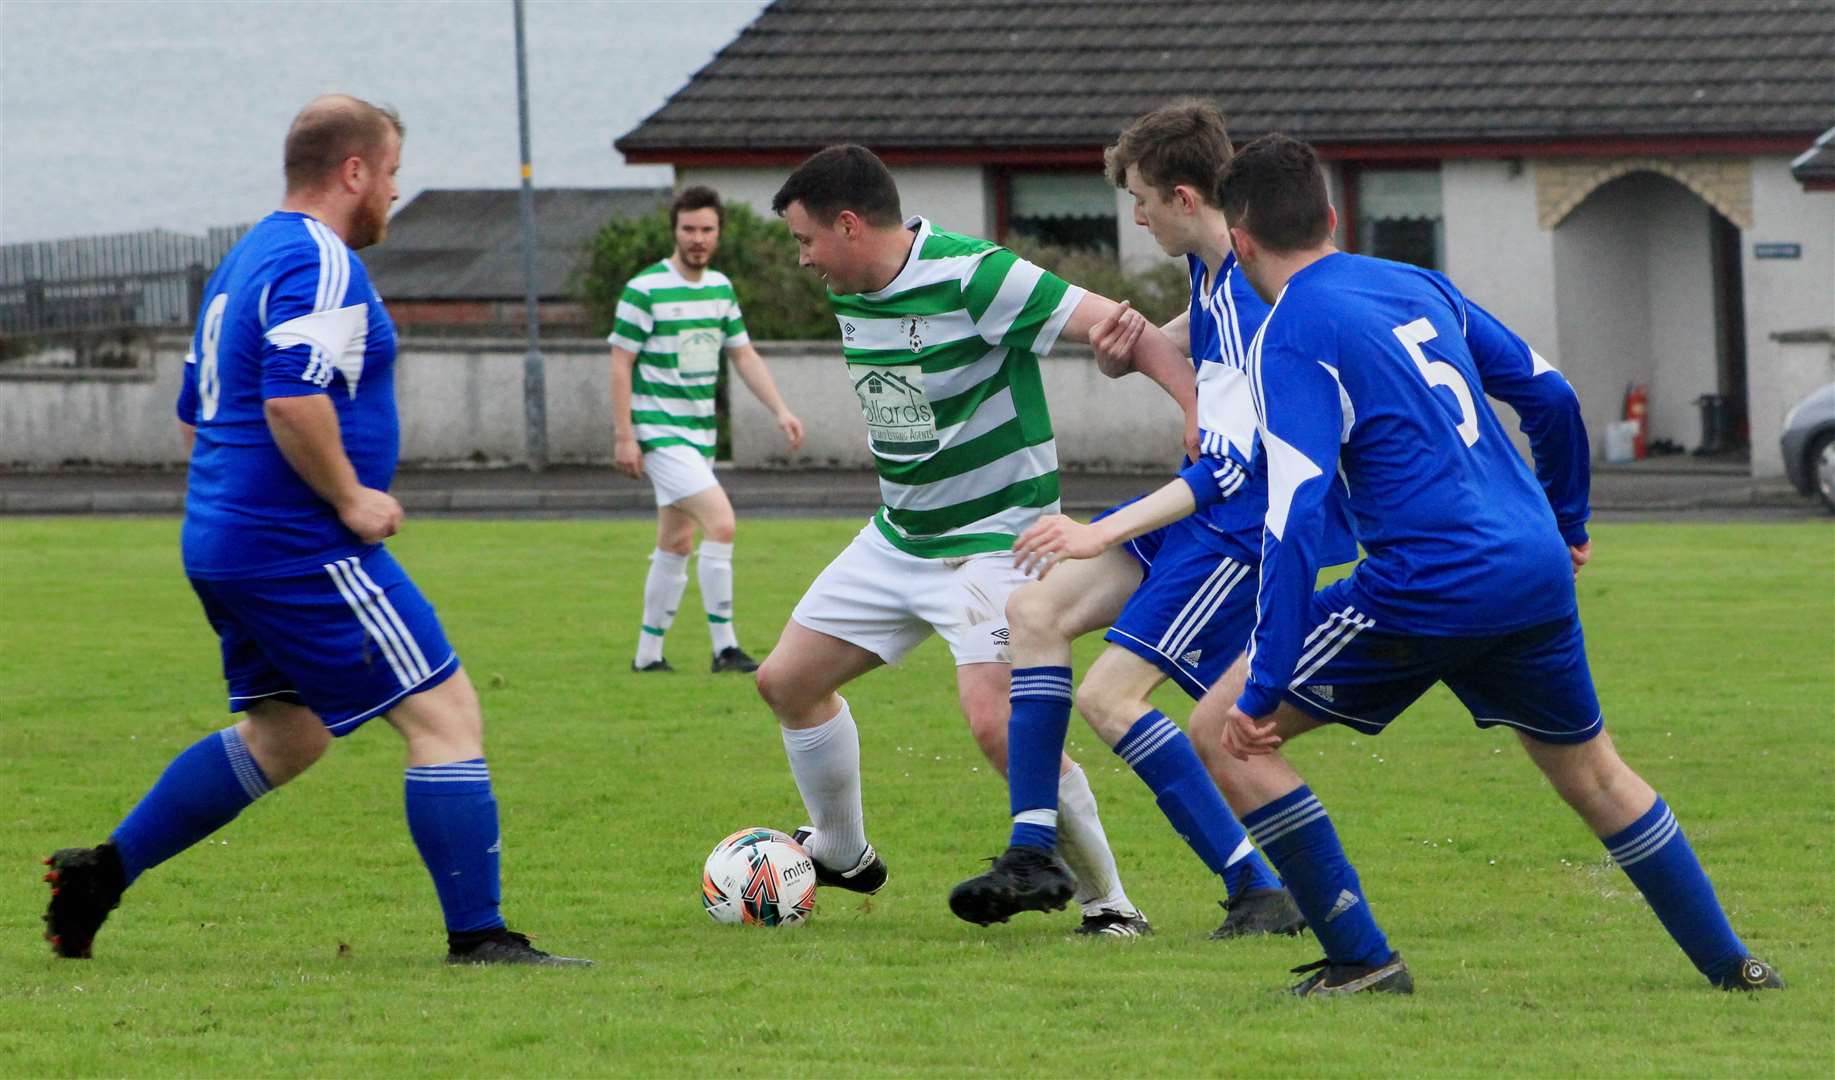 Castletown's Michael Smith finds himself surrounded by Keiss opponents.